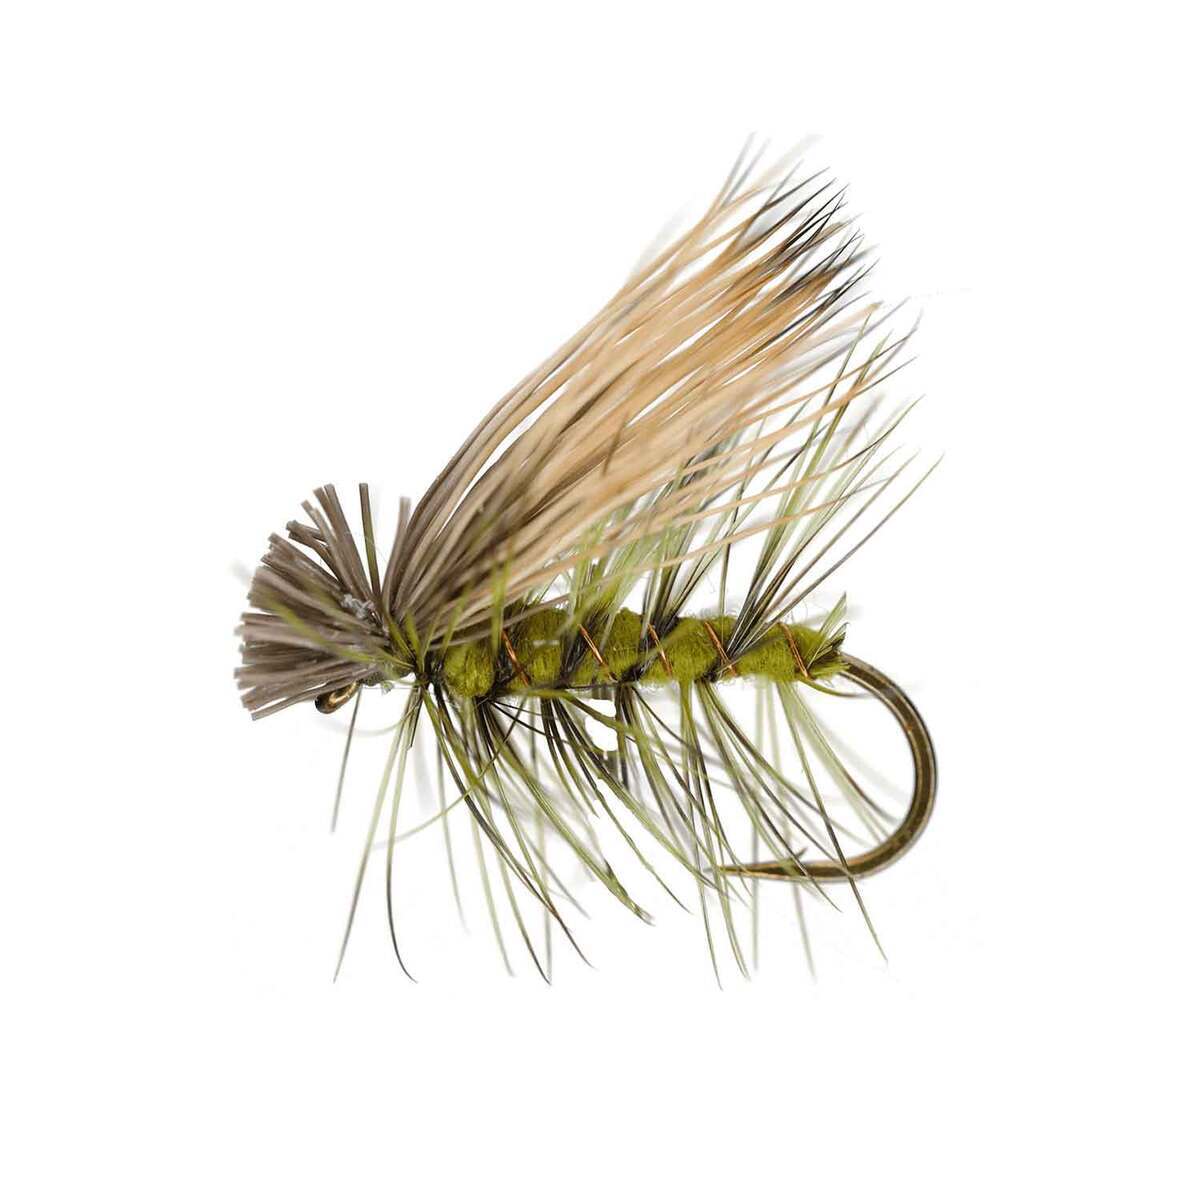 RoundRocks Elk Hair Caddis Fly - 6 Pack - Tan 14 by Sportsman's Warehouse